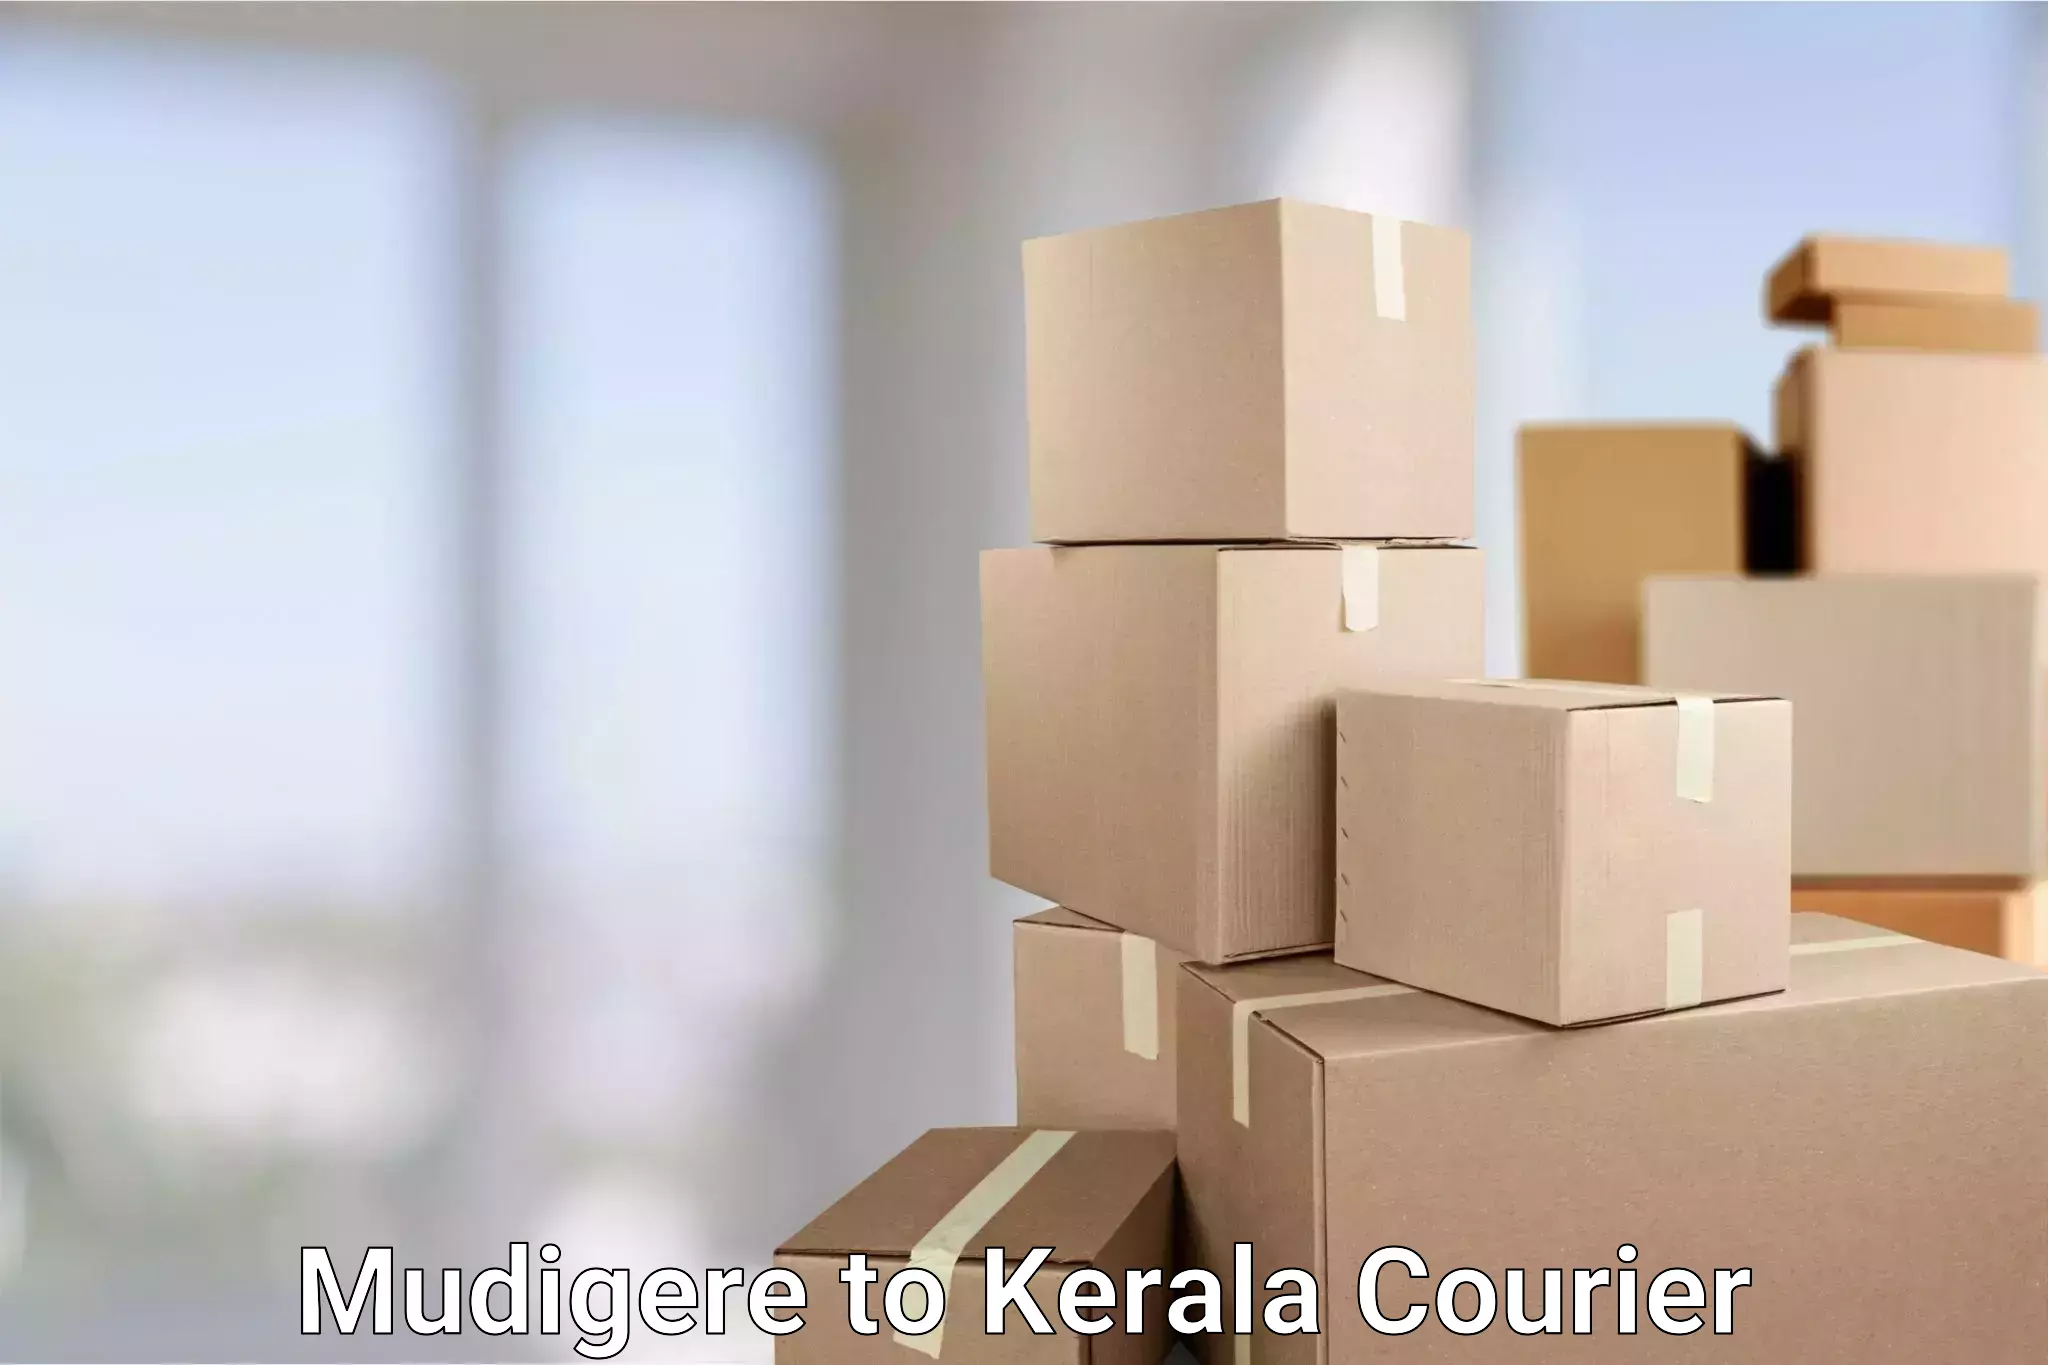 End-to-end delivery Mudigere to Kerala